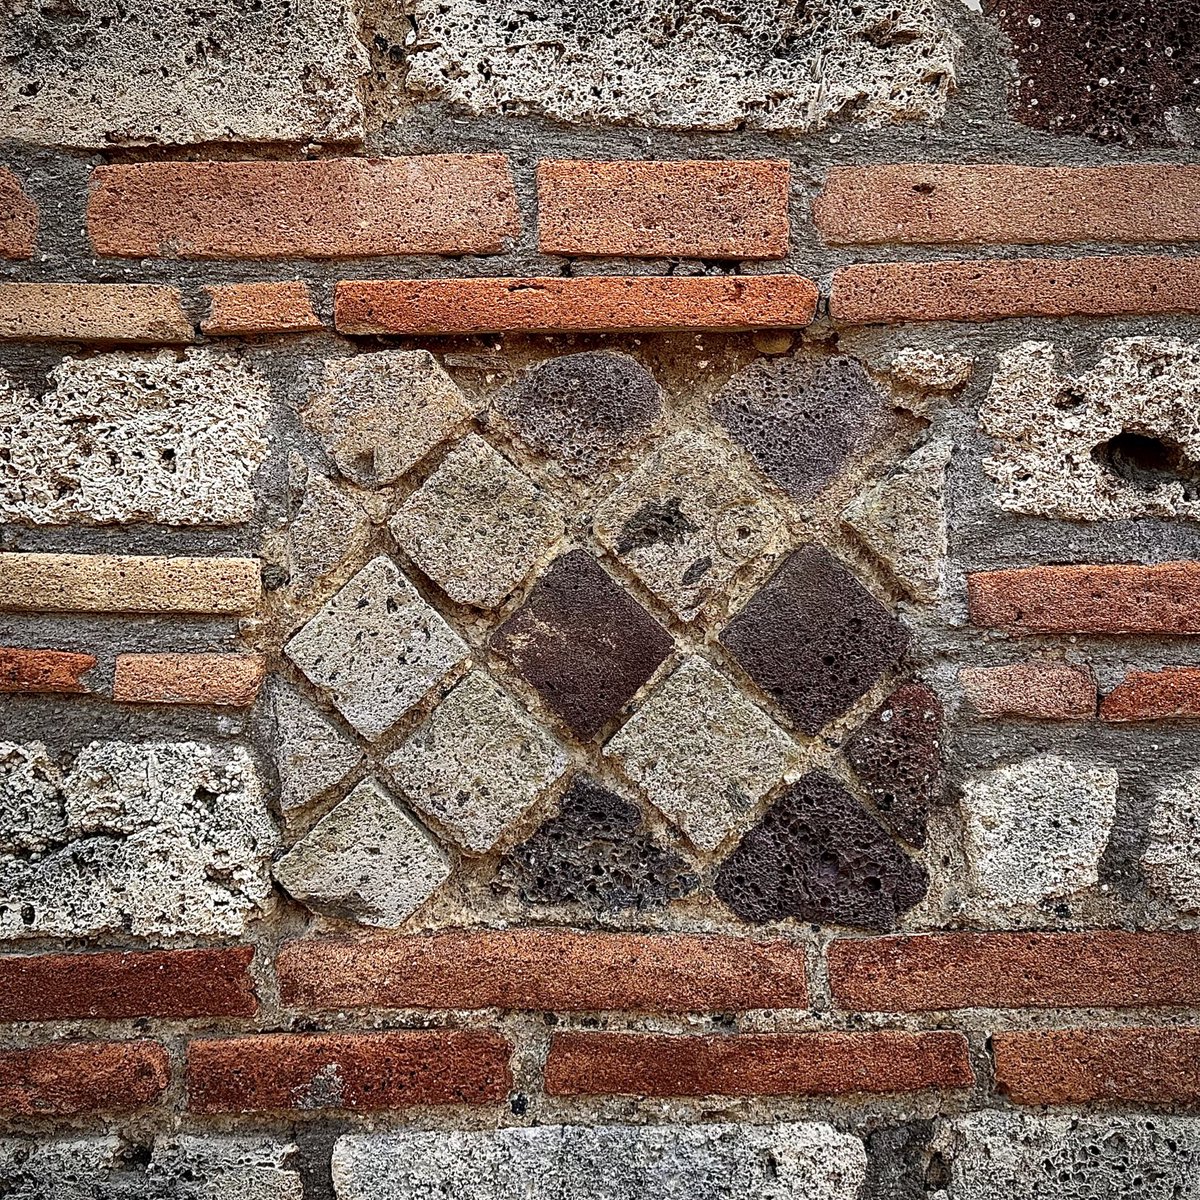 Haven’t stopped to admire the little #wallporn details of #Pompeii for a while so this morning I did.